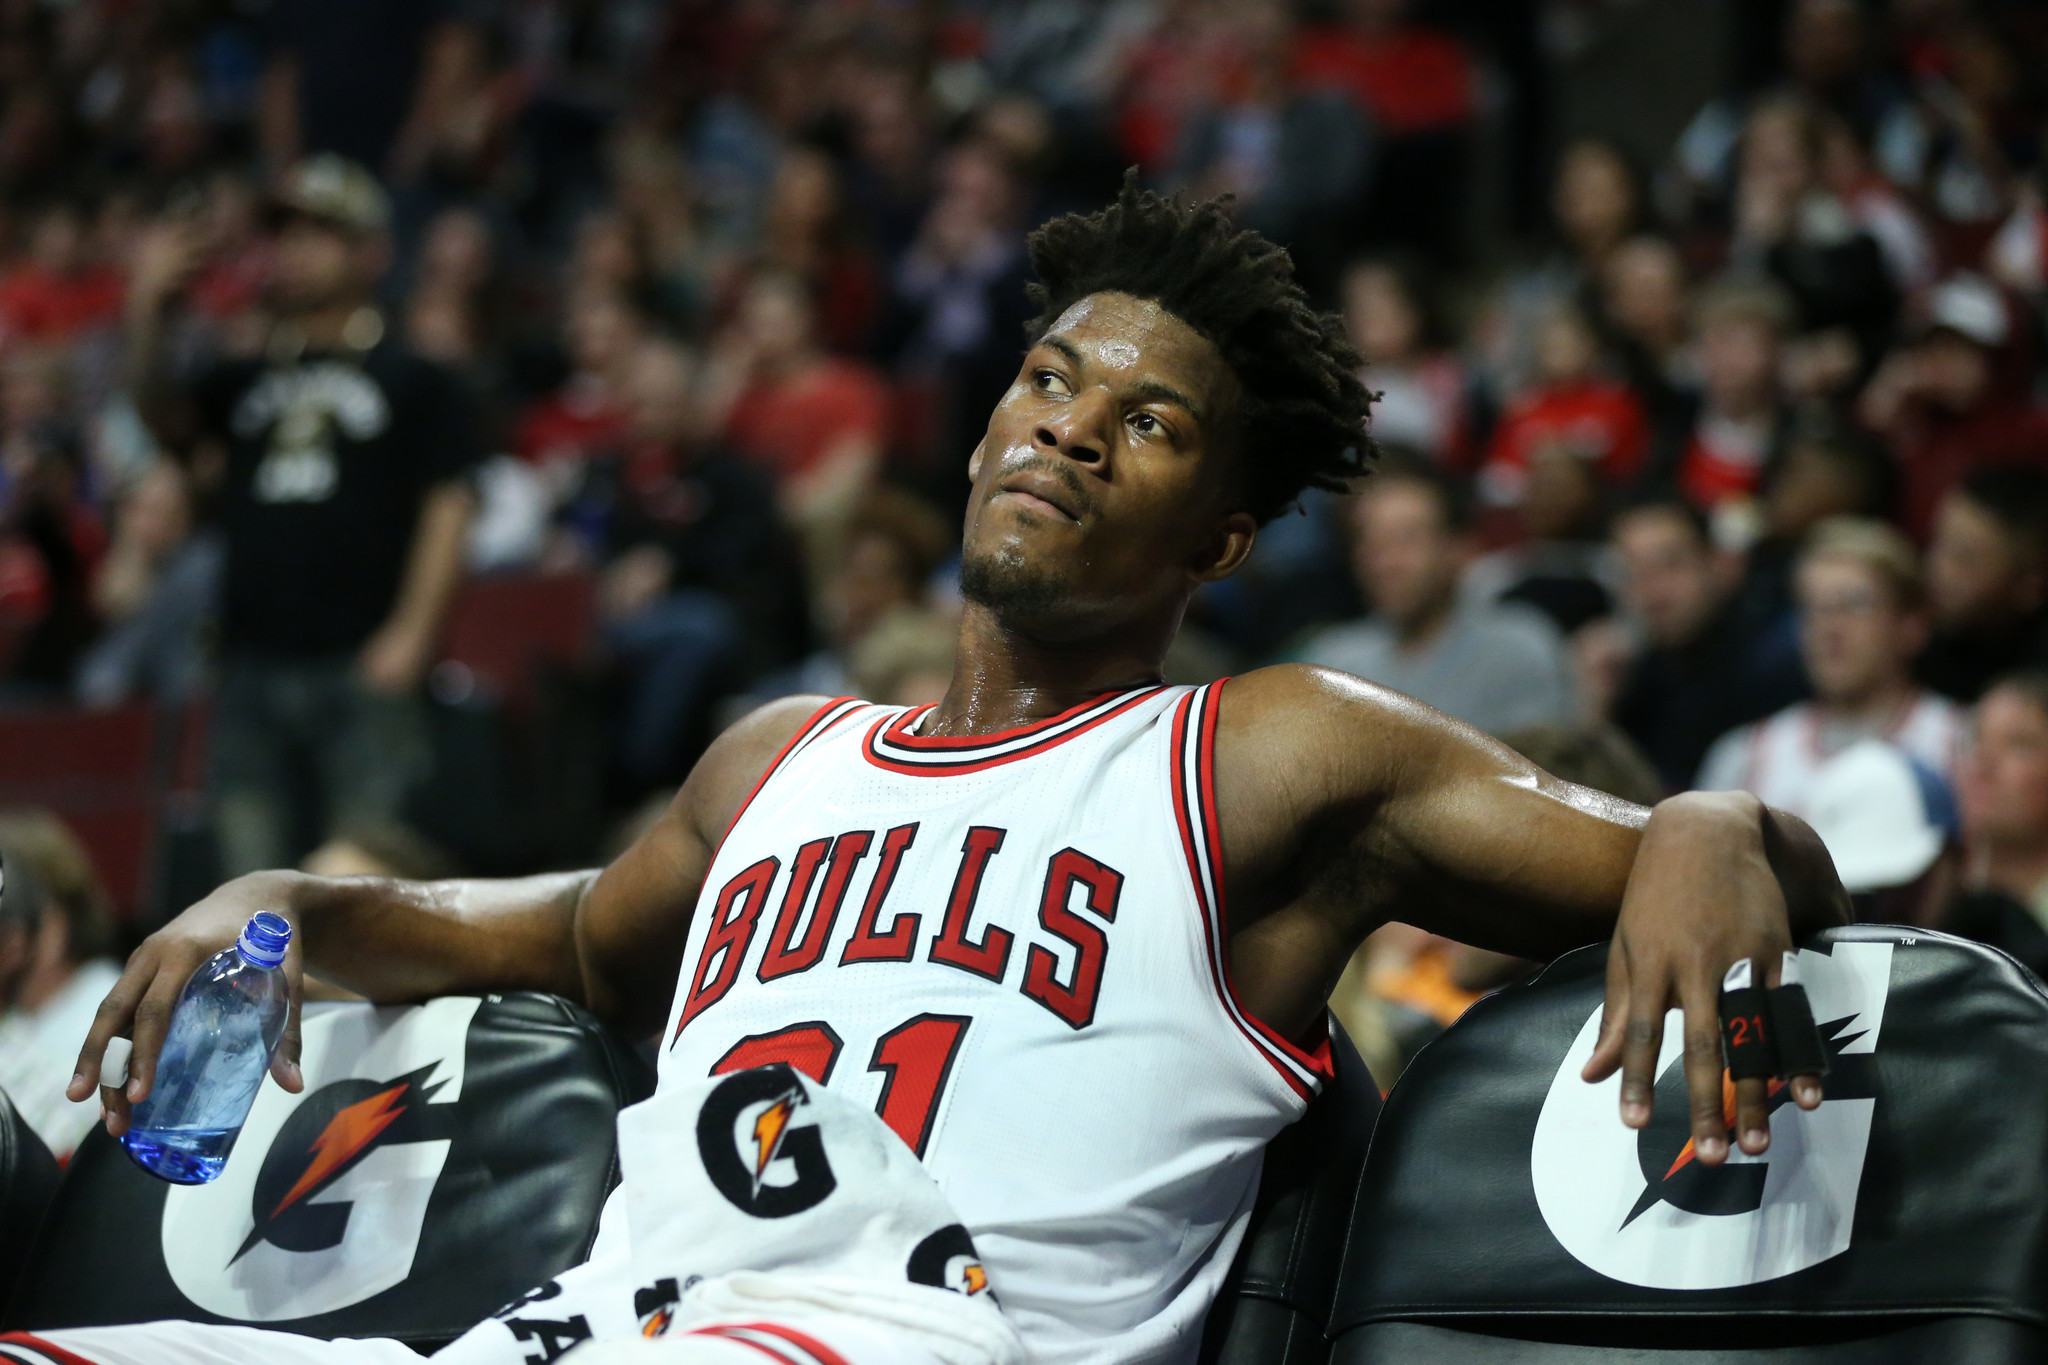 Bulls should trade Jimmy Butler — but do they have it in them?